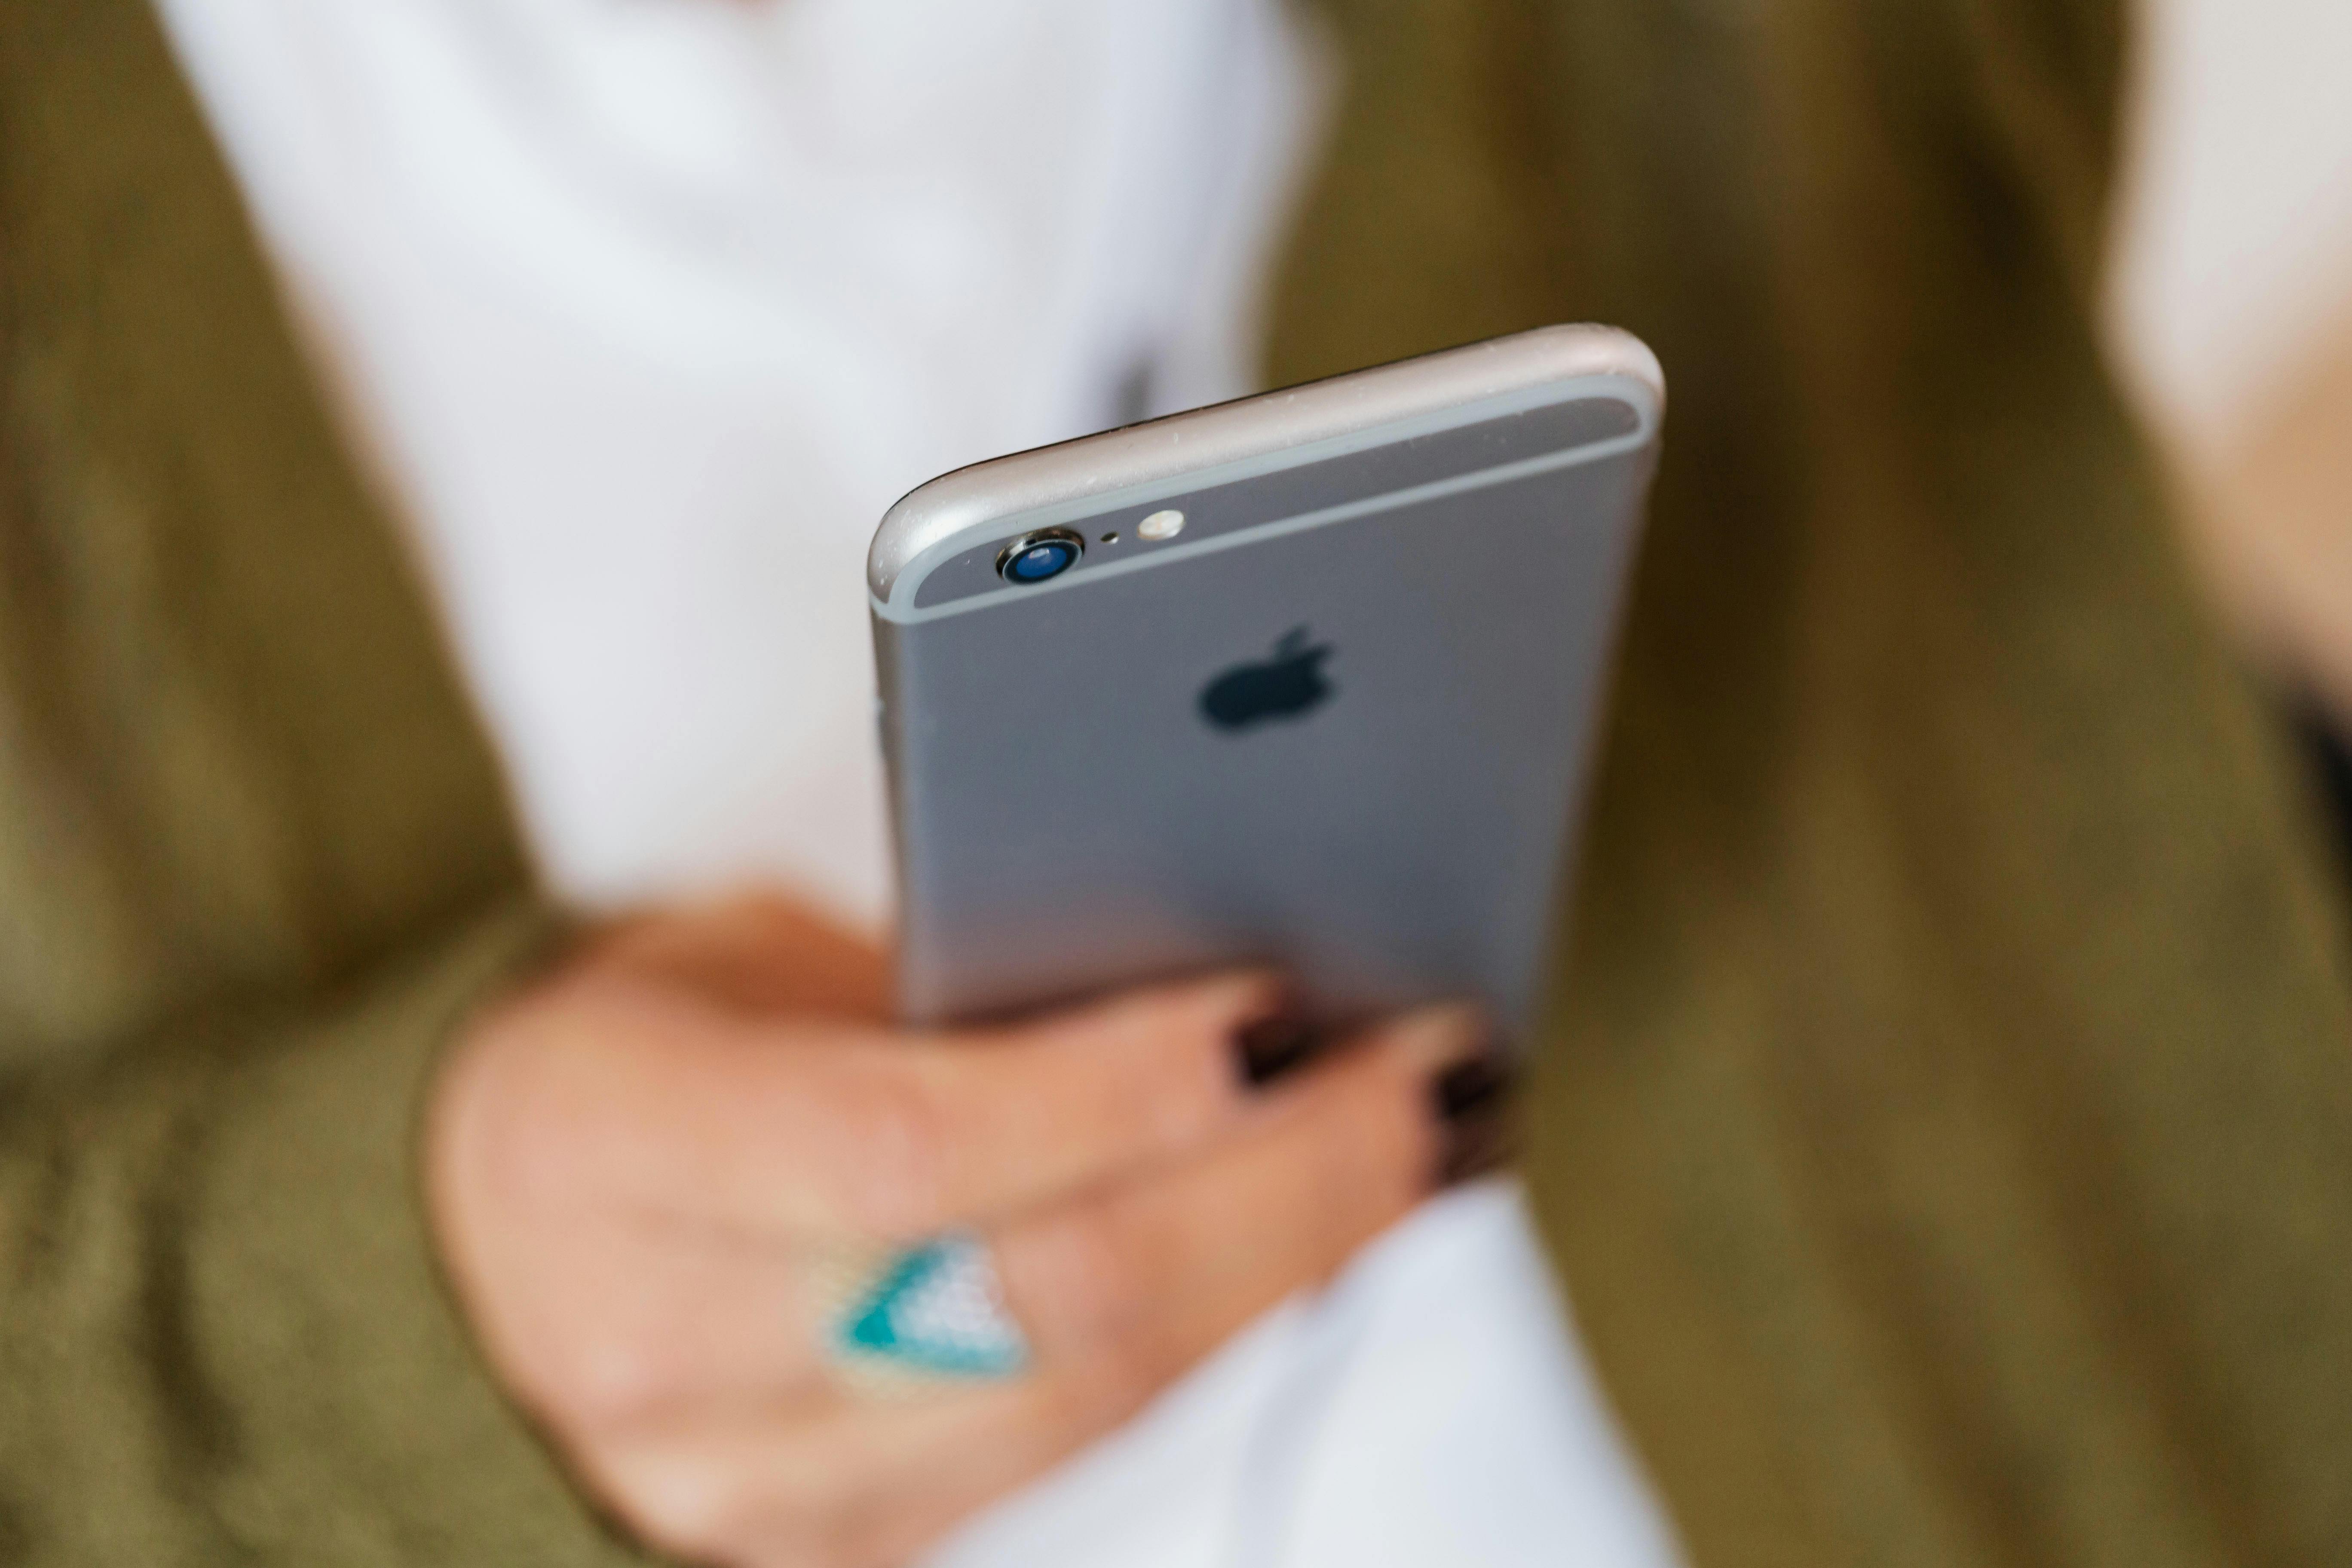 Person holding an iphone | Source: Pexels